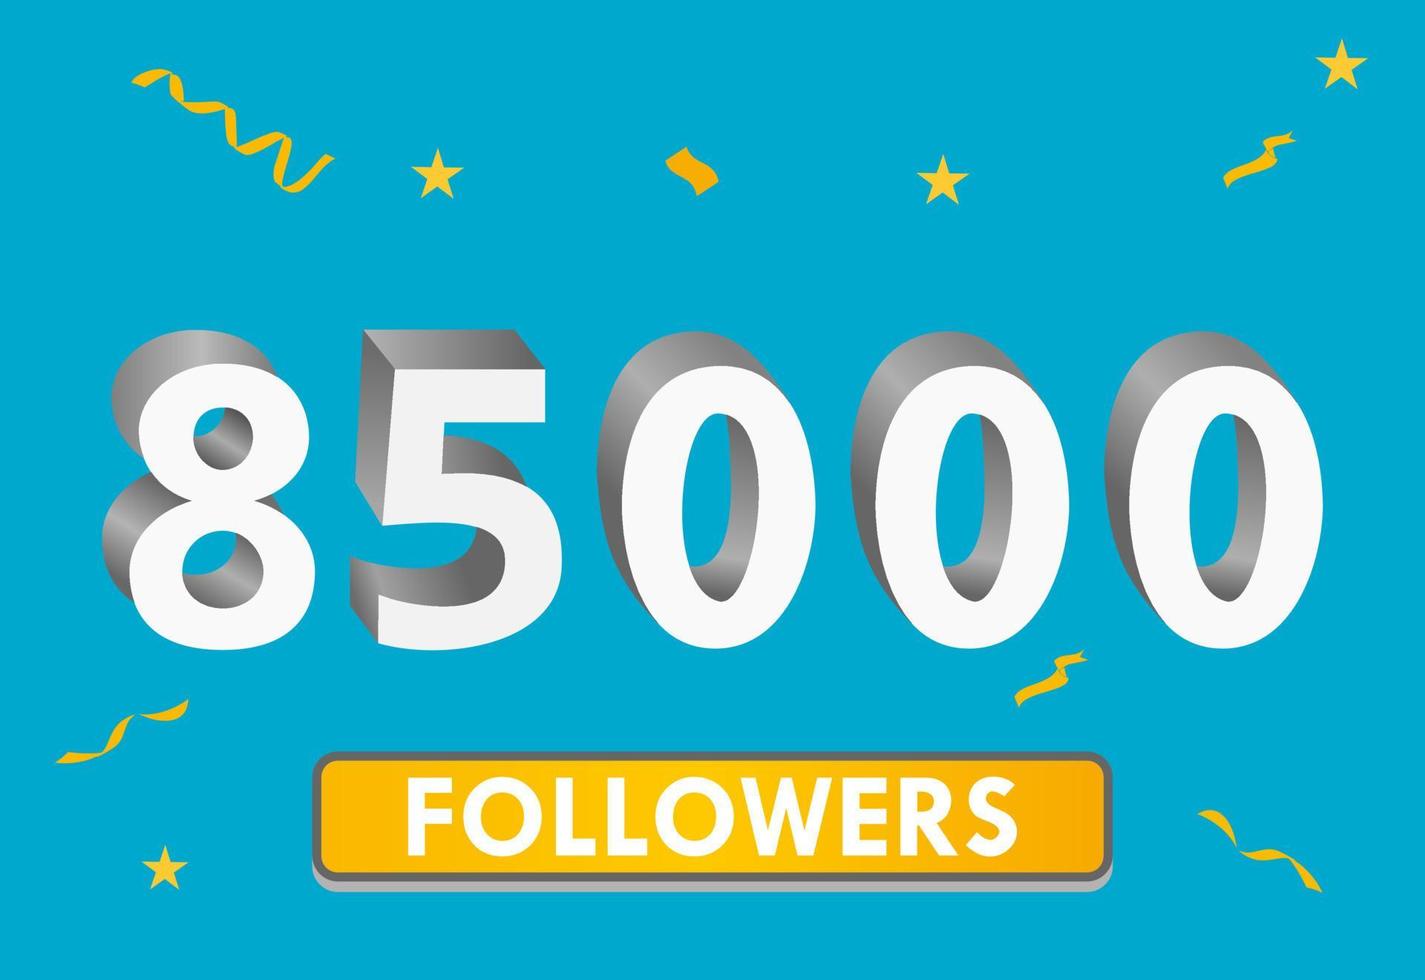 Illustration 3d numbers for social media 85k likes thanks, celebrating subscribers fans. Banner with 85000 followers vector